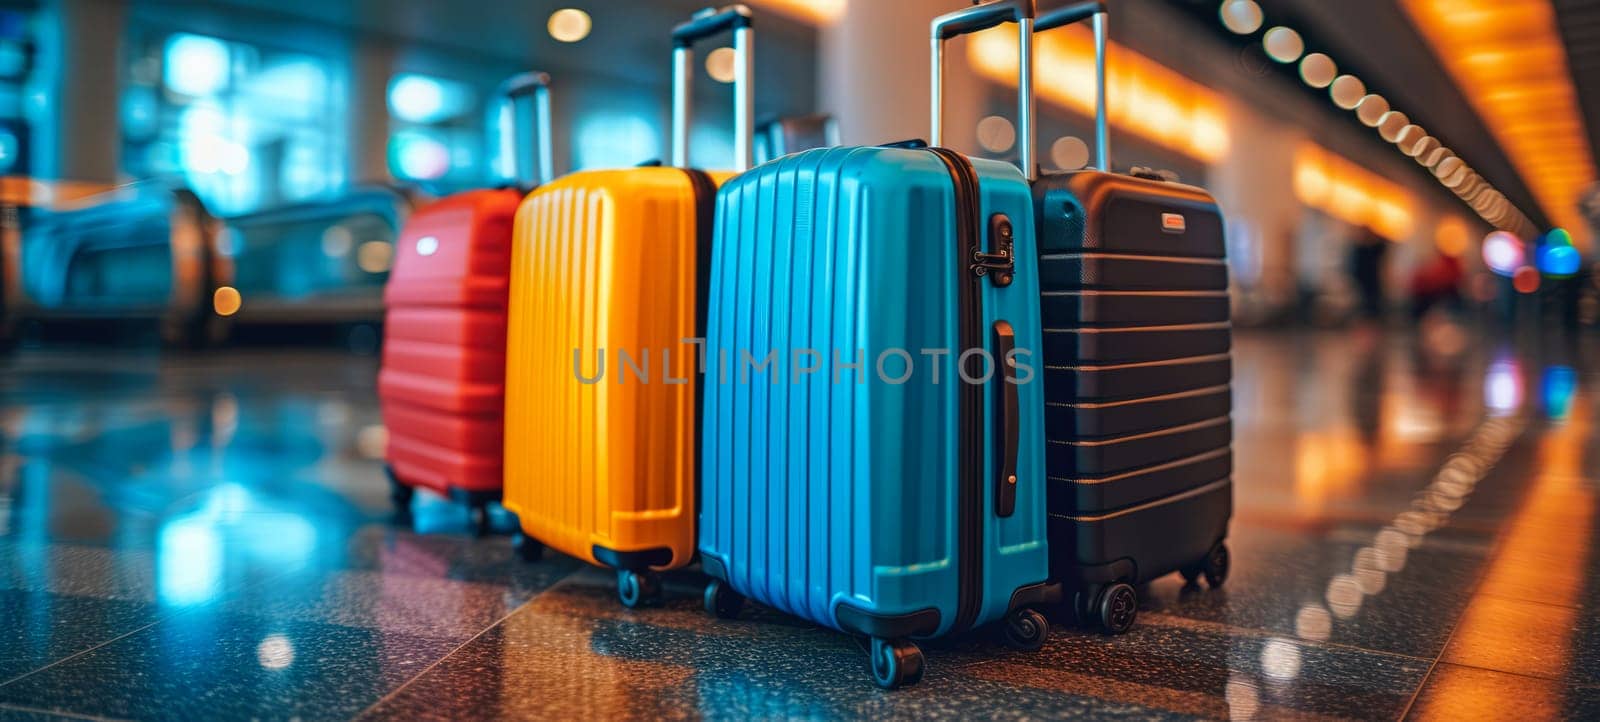 Suitcases at the airport. Travel and vacation theme background. Travel banner.